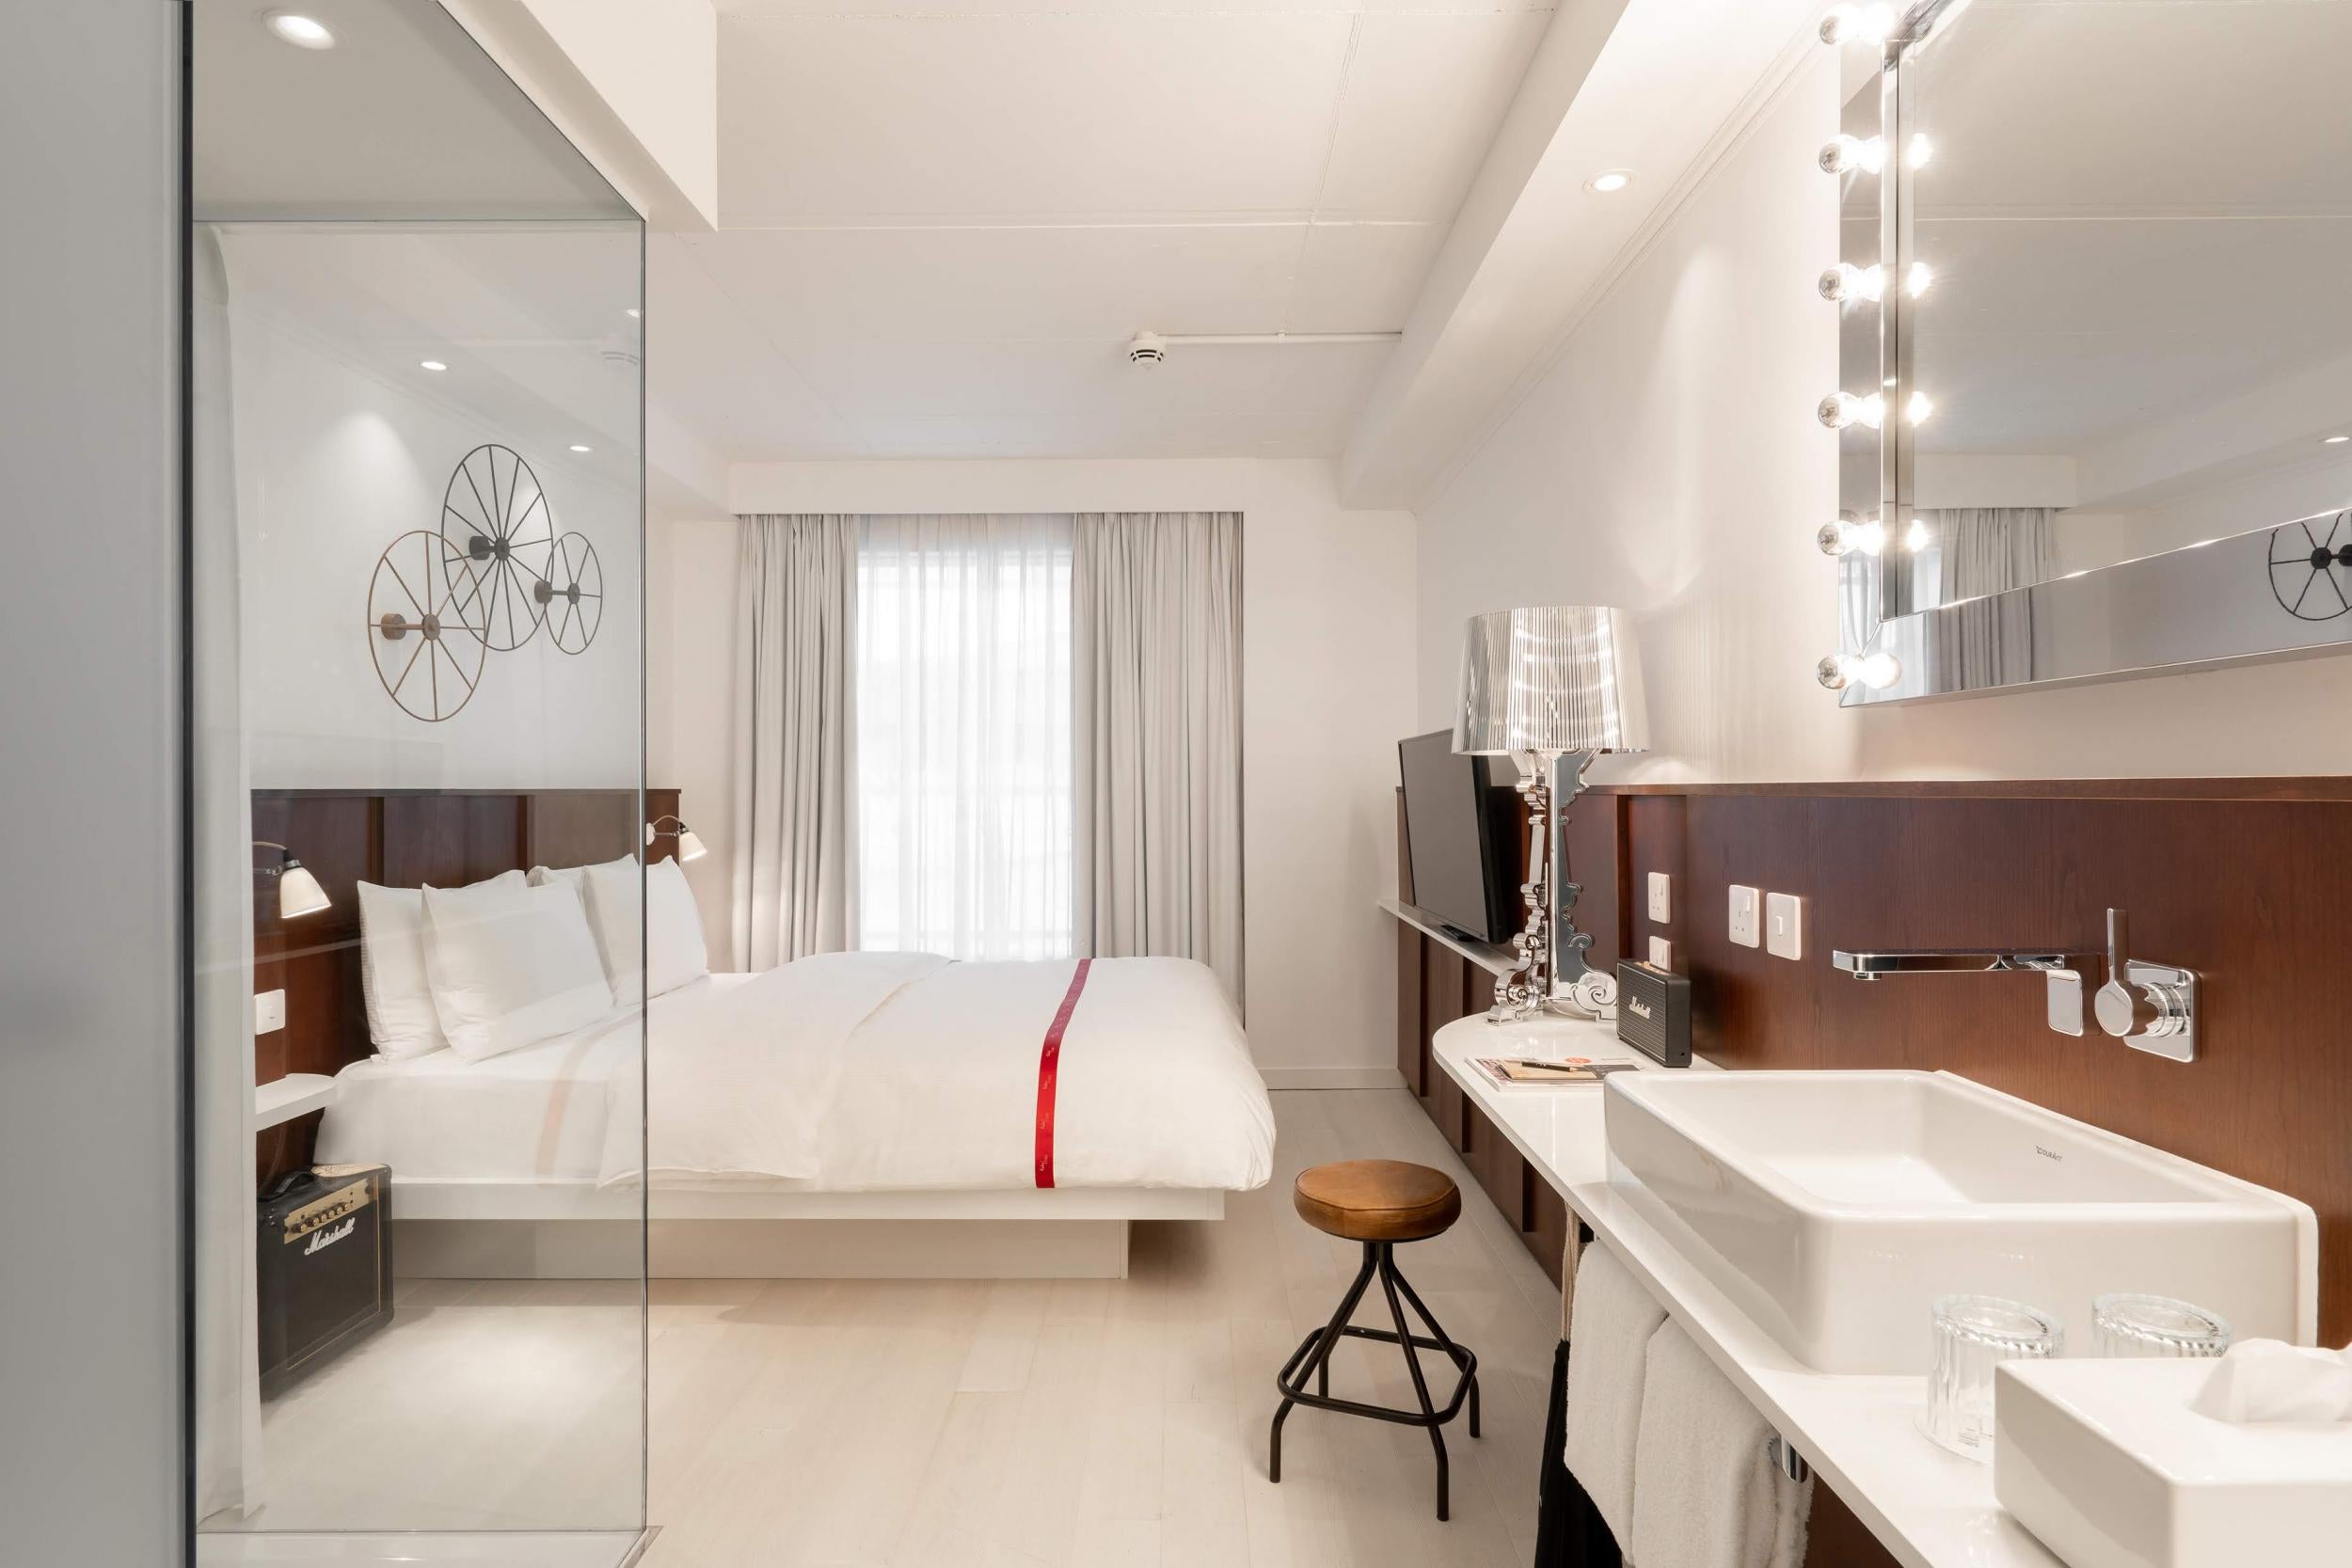 Ruby Lucy London is bringing luxury for less to the capital